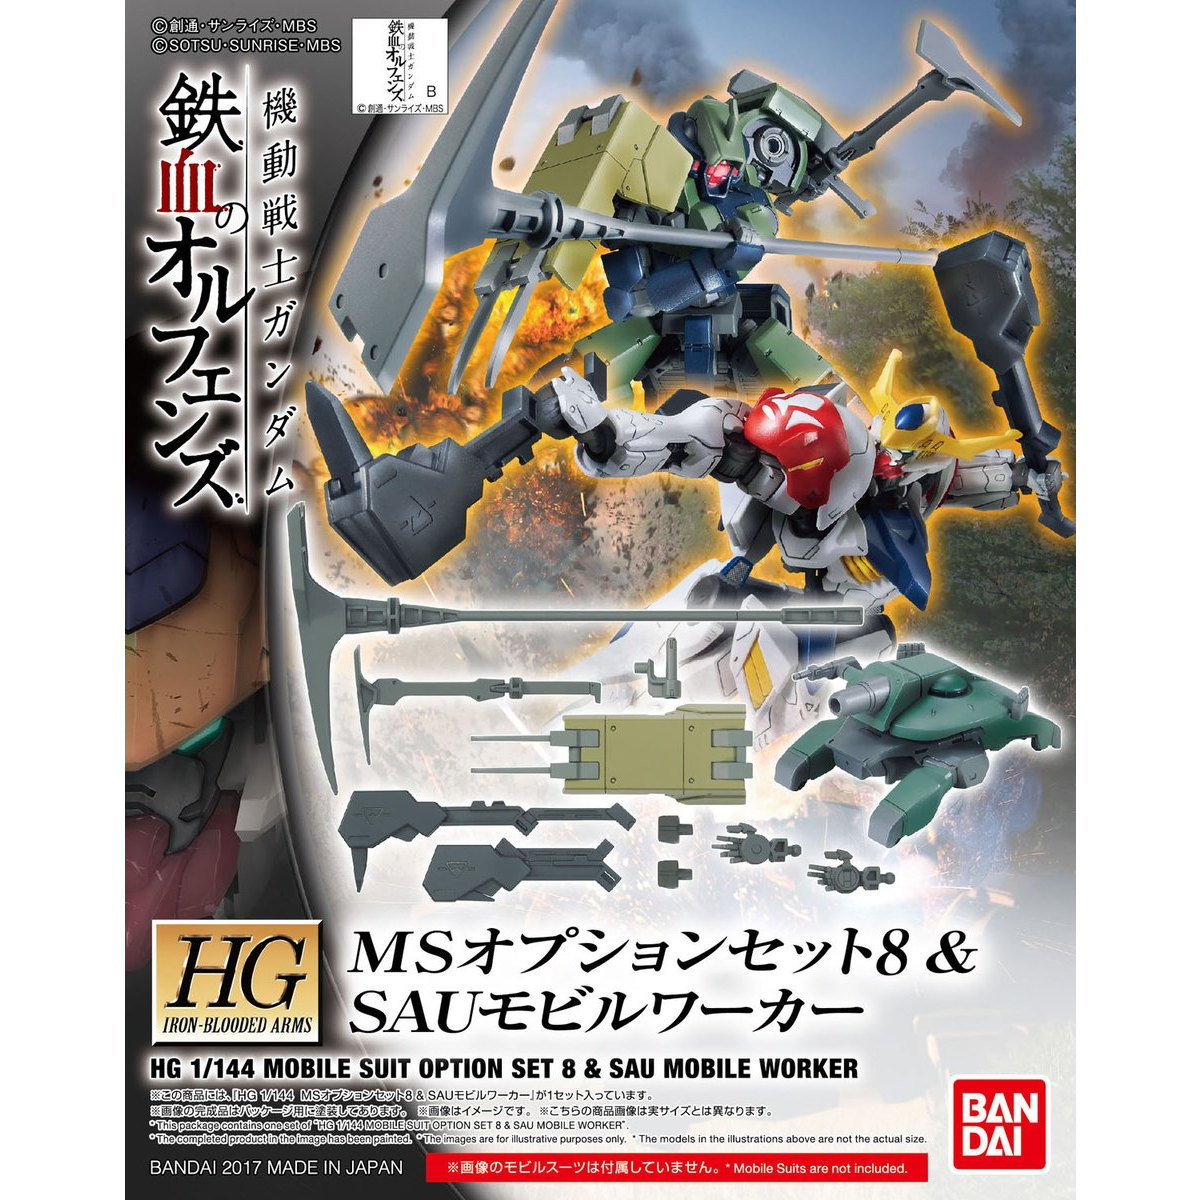 HG 1/144 MS OPTION SET 8 SAU MOBILE WORKER - Release Info, Box art and Official Images